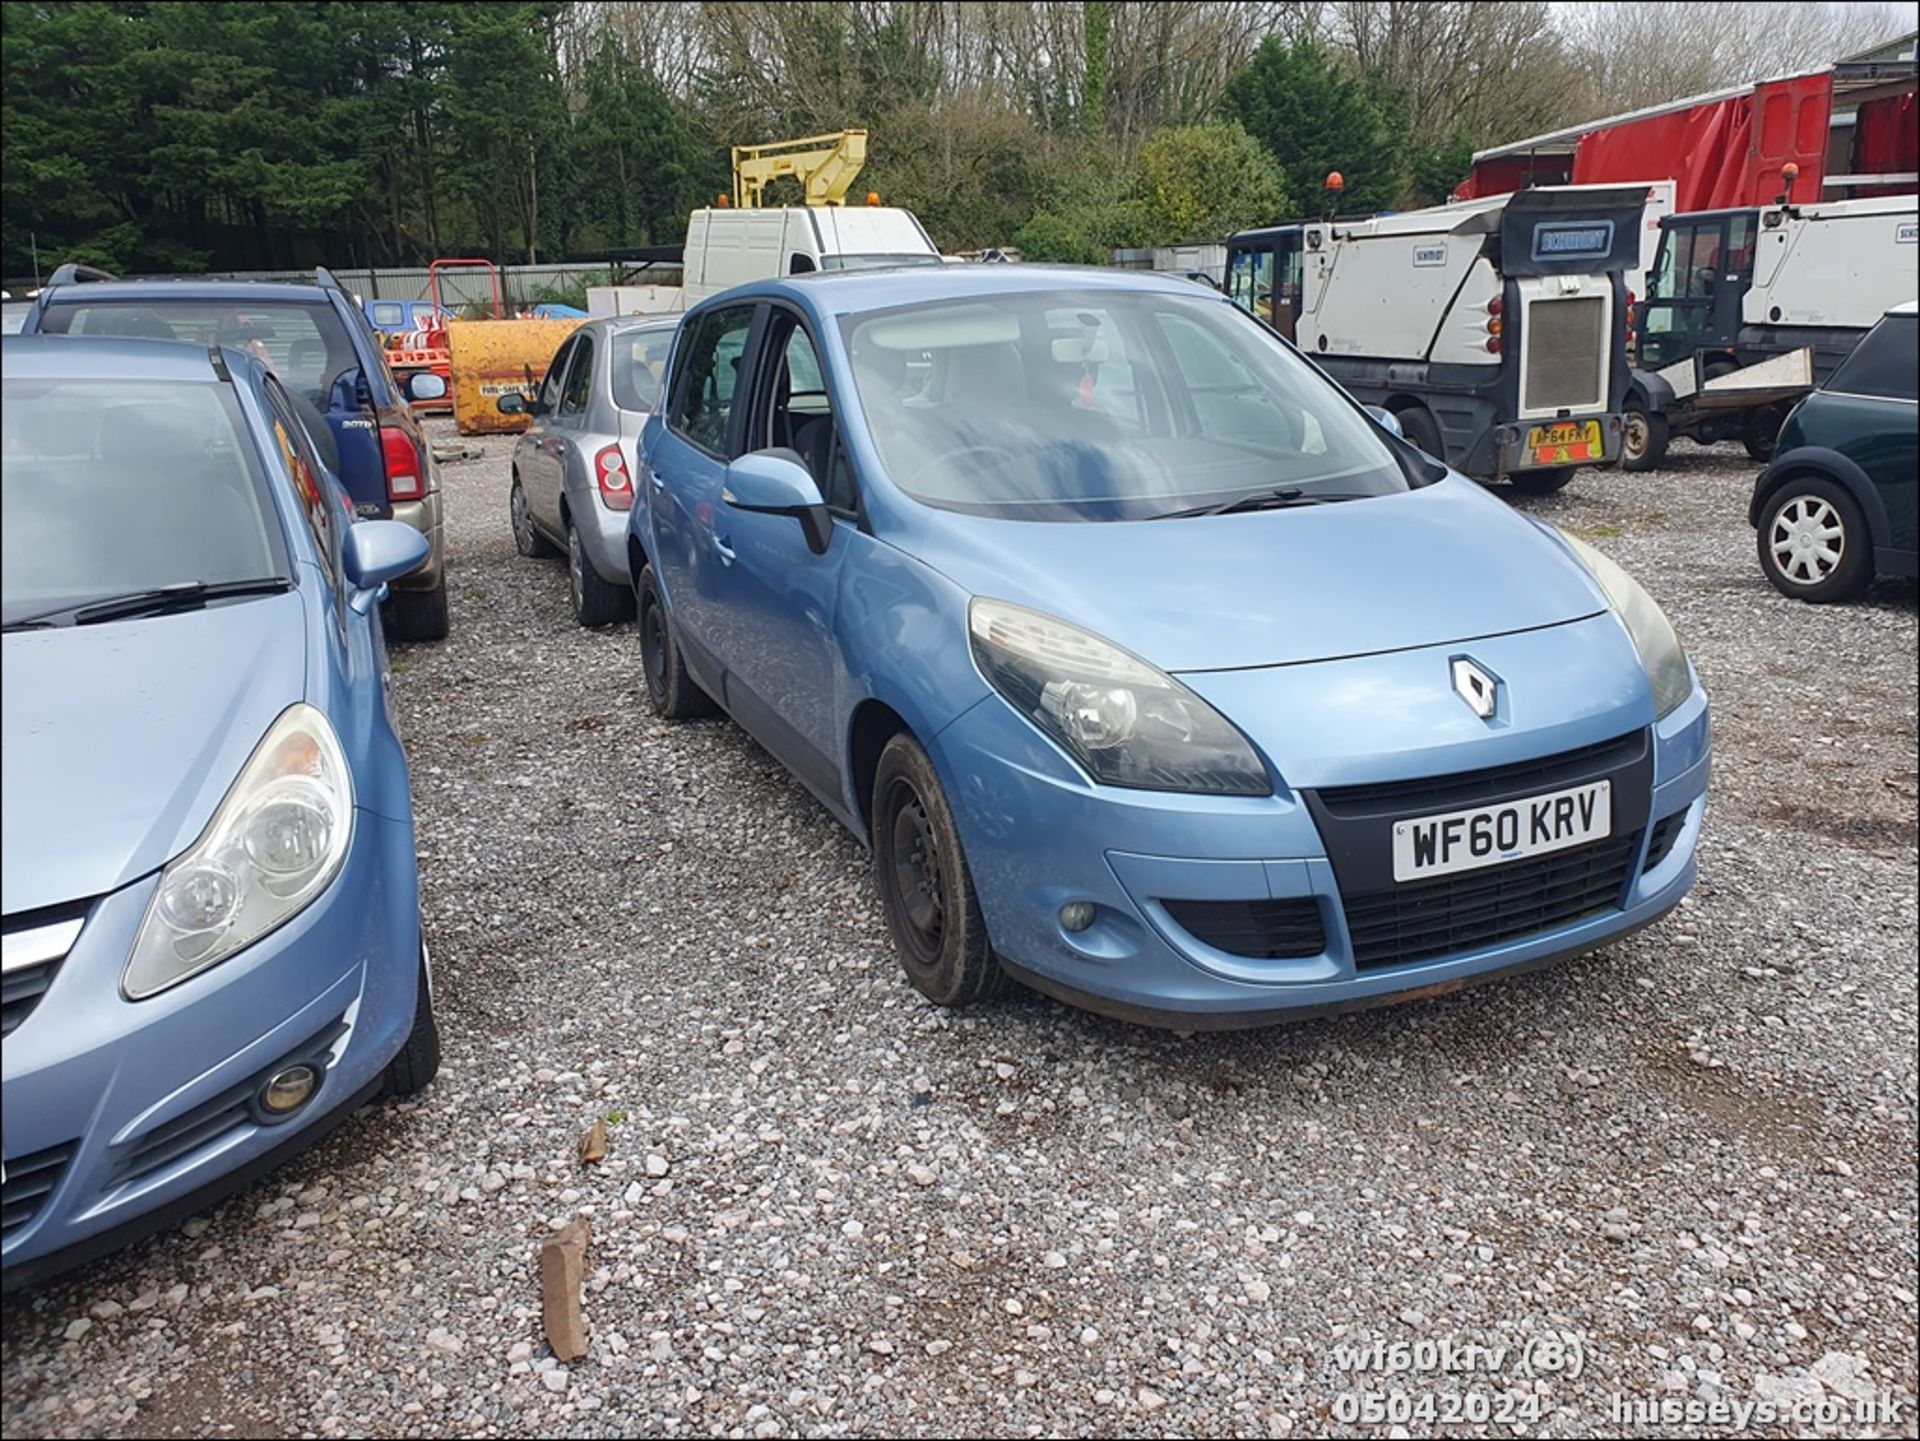 10/60 RENAULT SCENIC EXPRESSION DCI 105 - 1461cc 5dr MPV (Blue) - Image 9 of 50